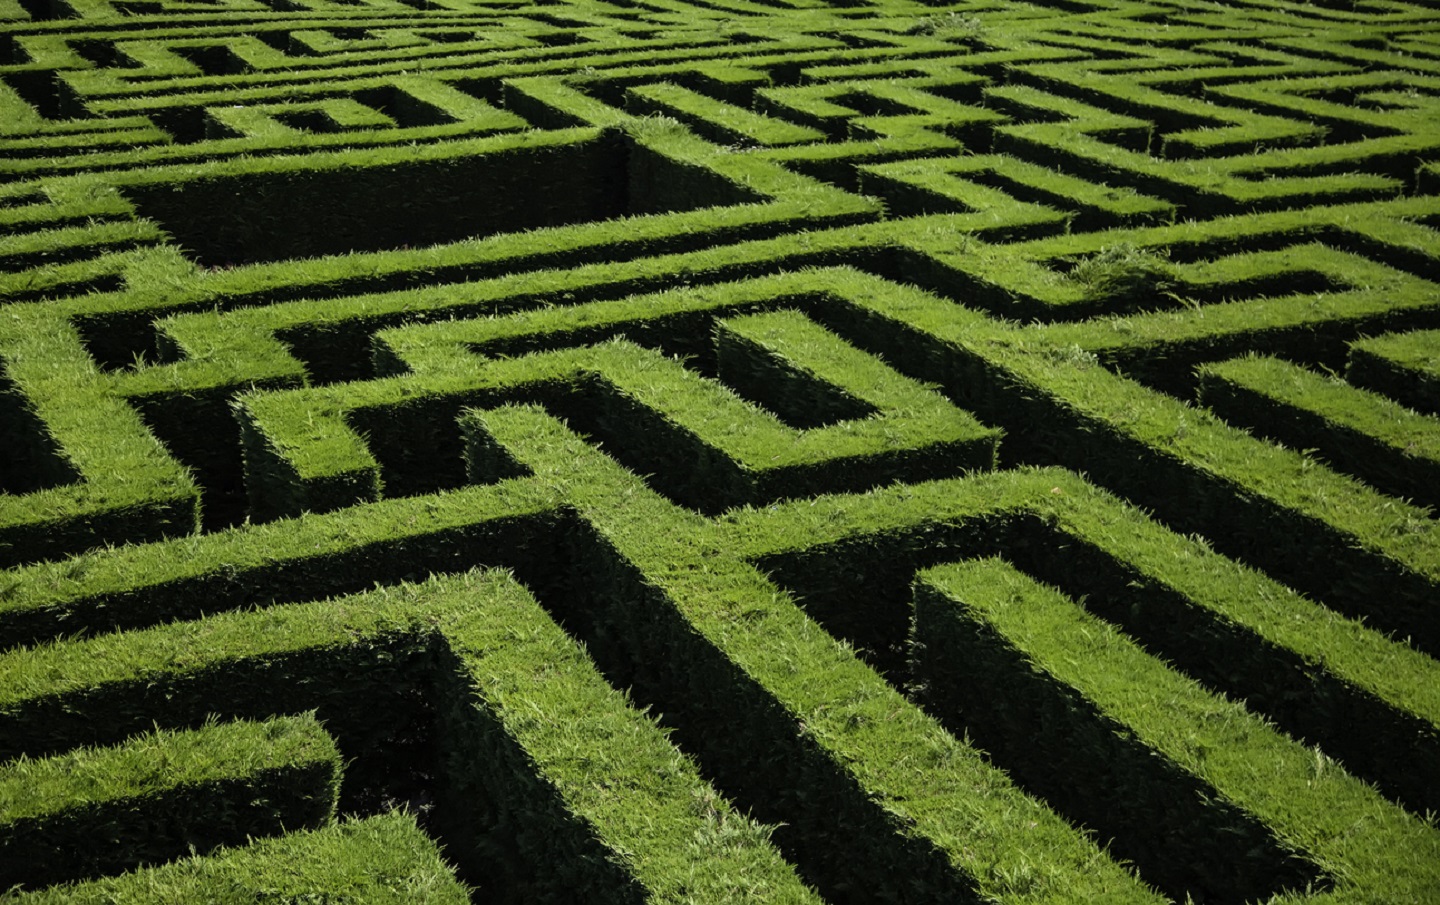 Maze detail in a forest, game and fun